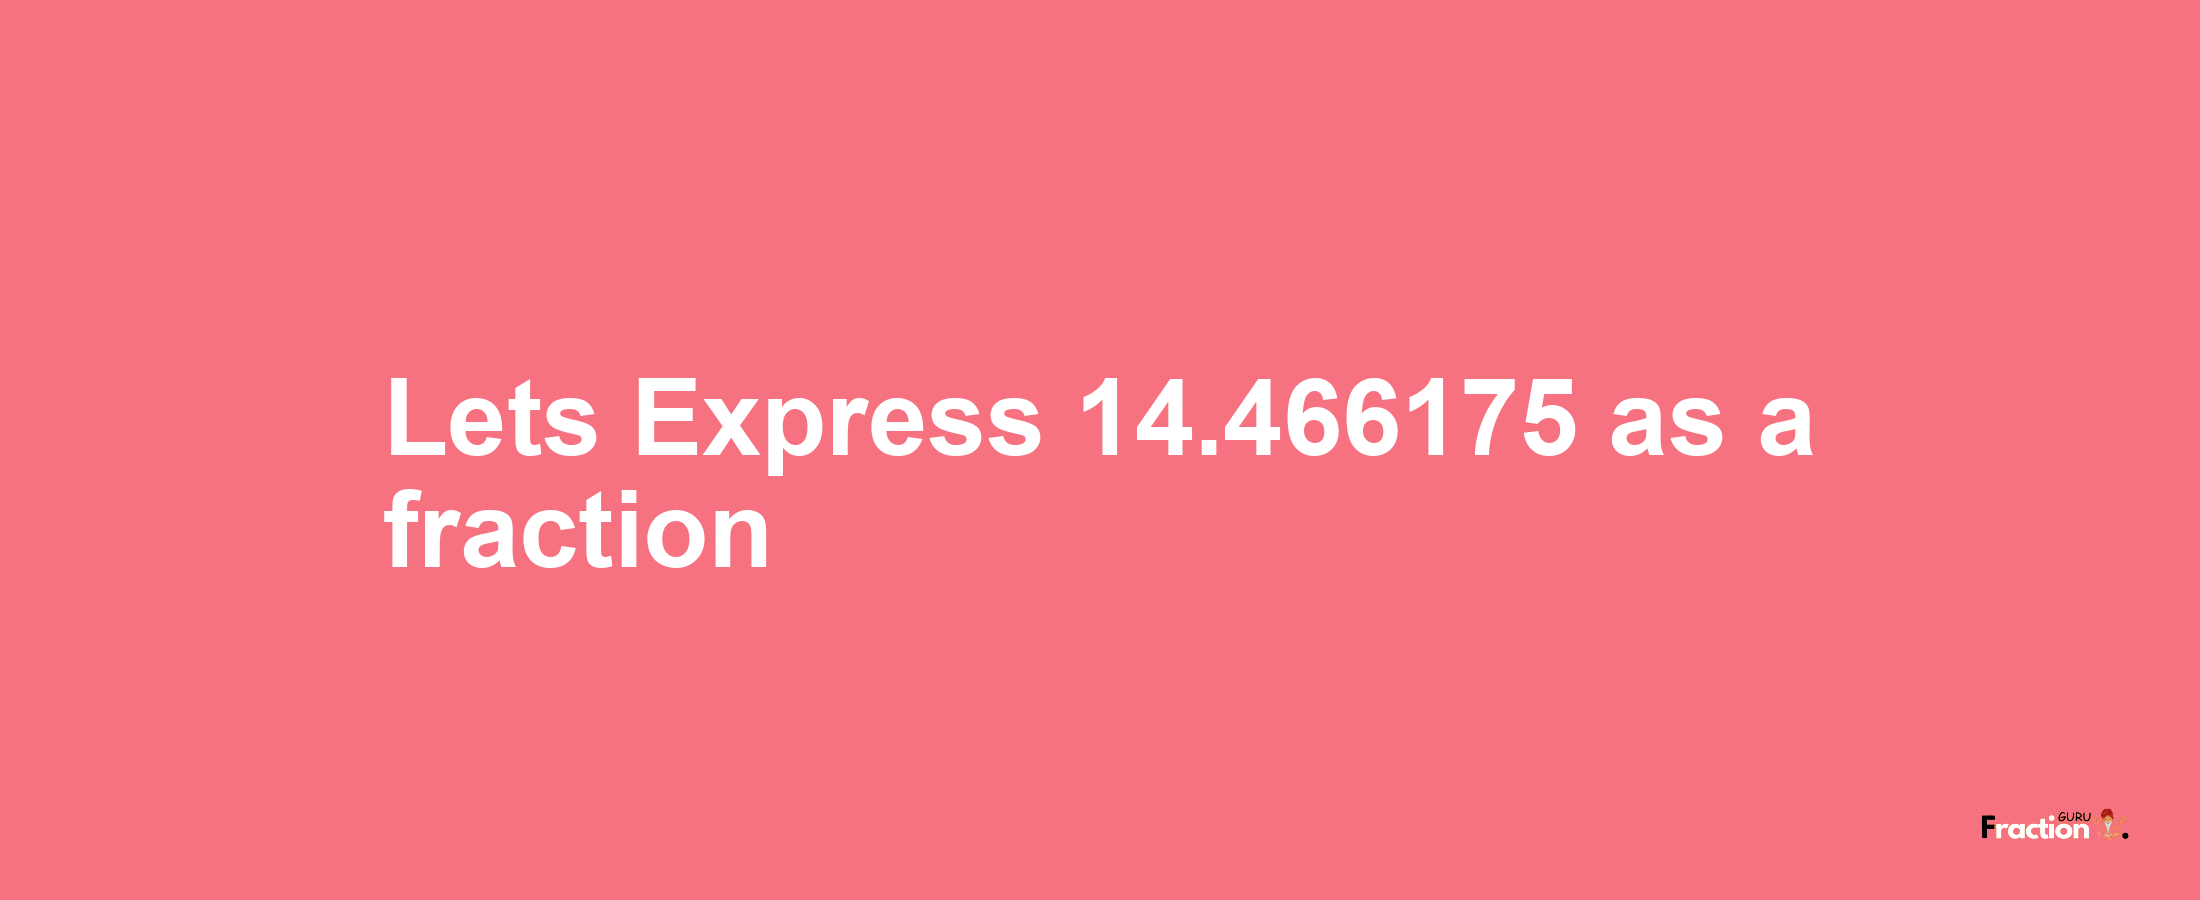 Lets Express 14.466175 as afraction